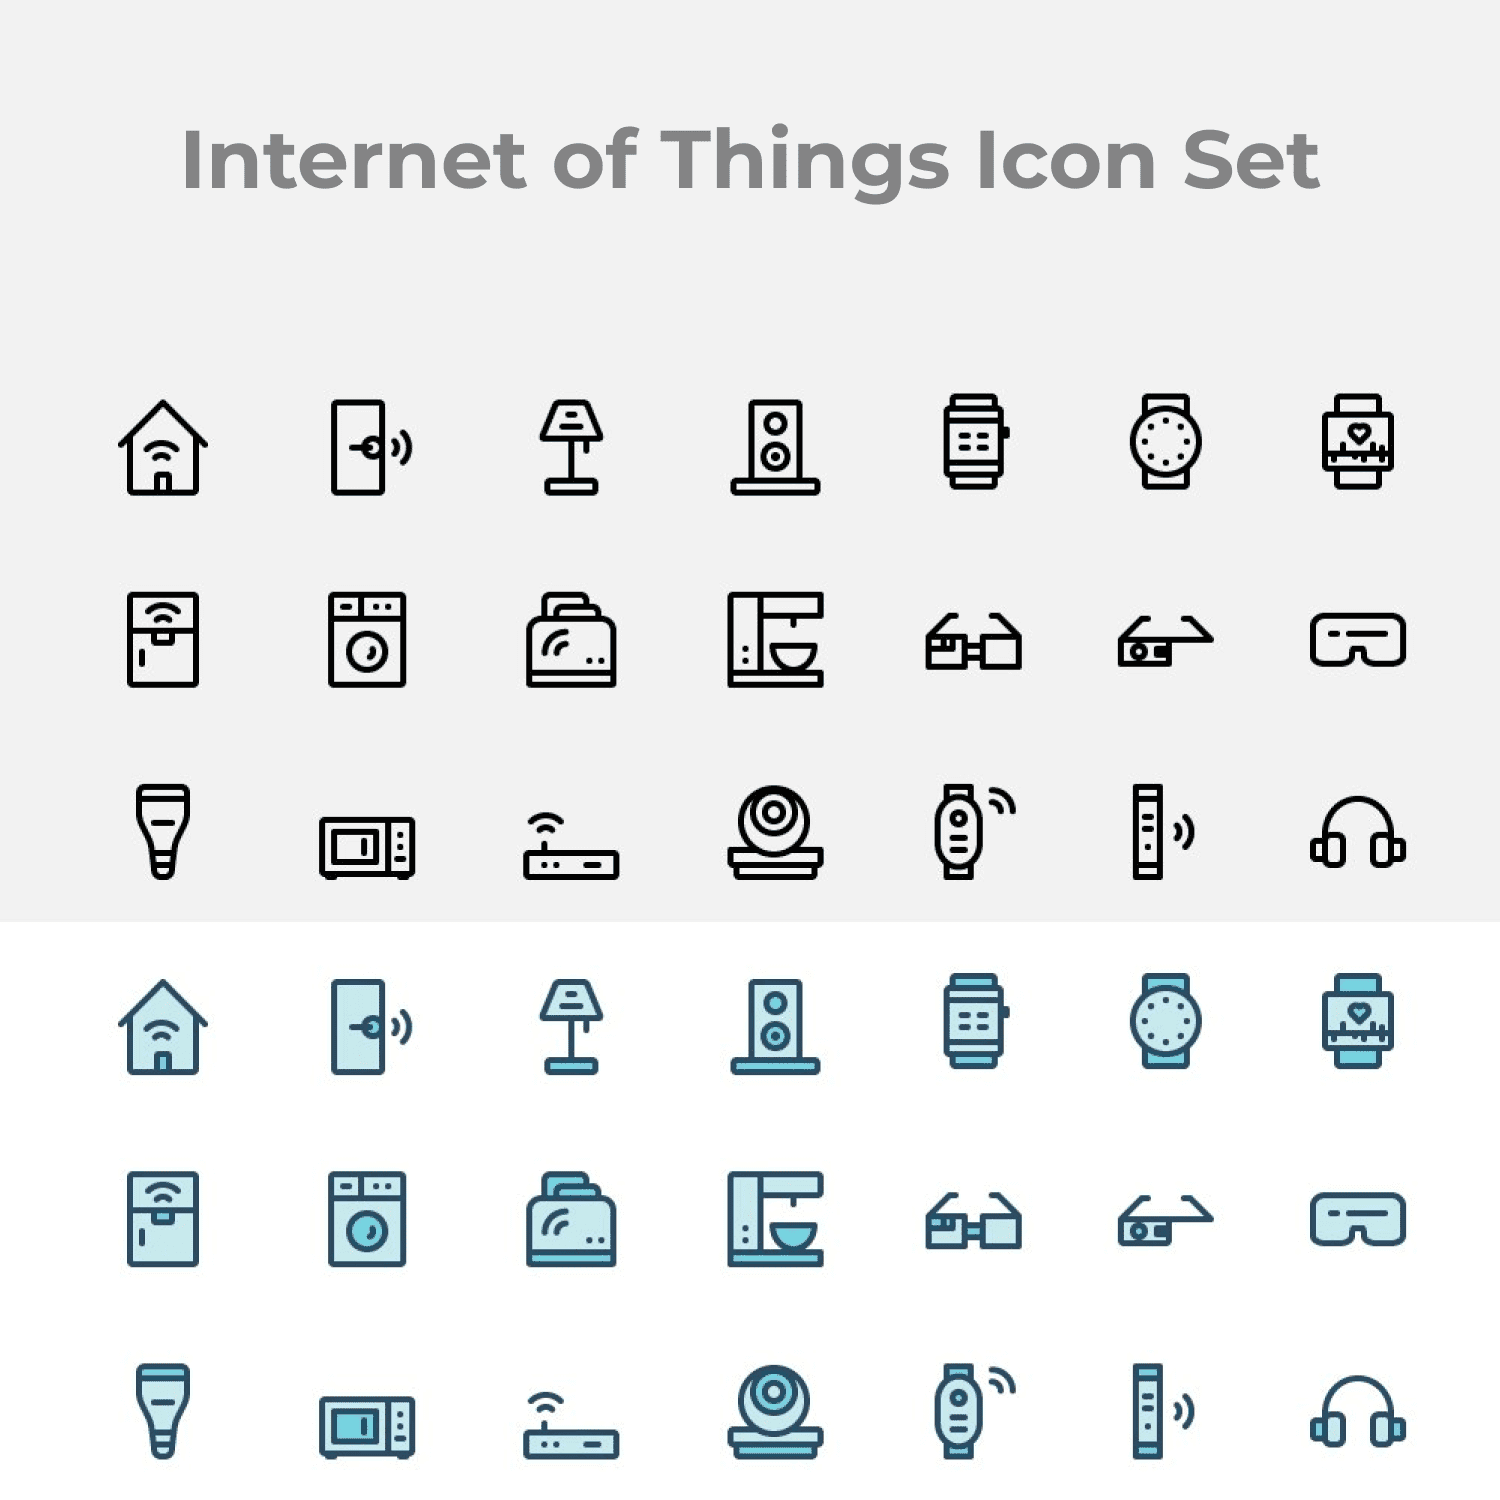 Internet of Things Icon Set main cover.